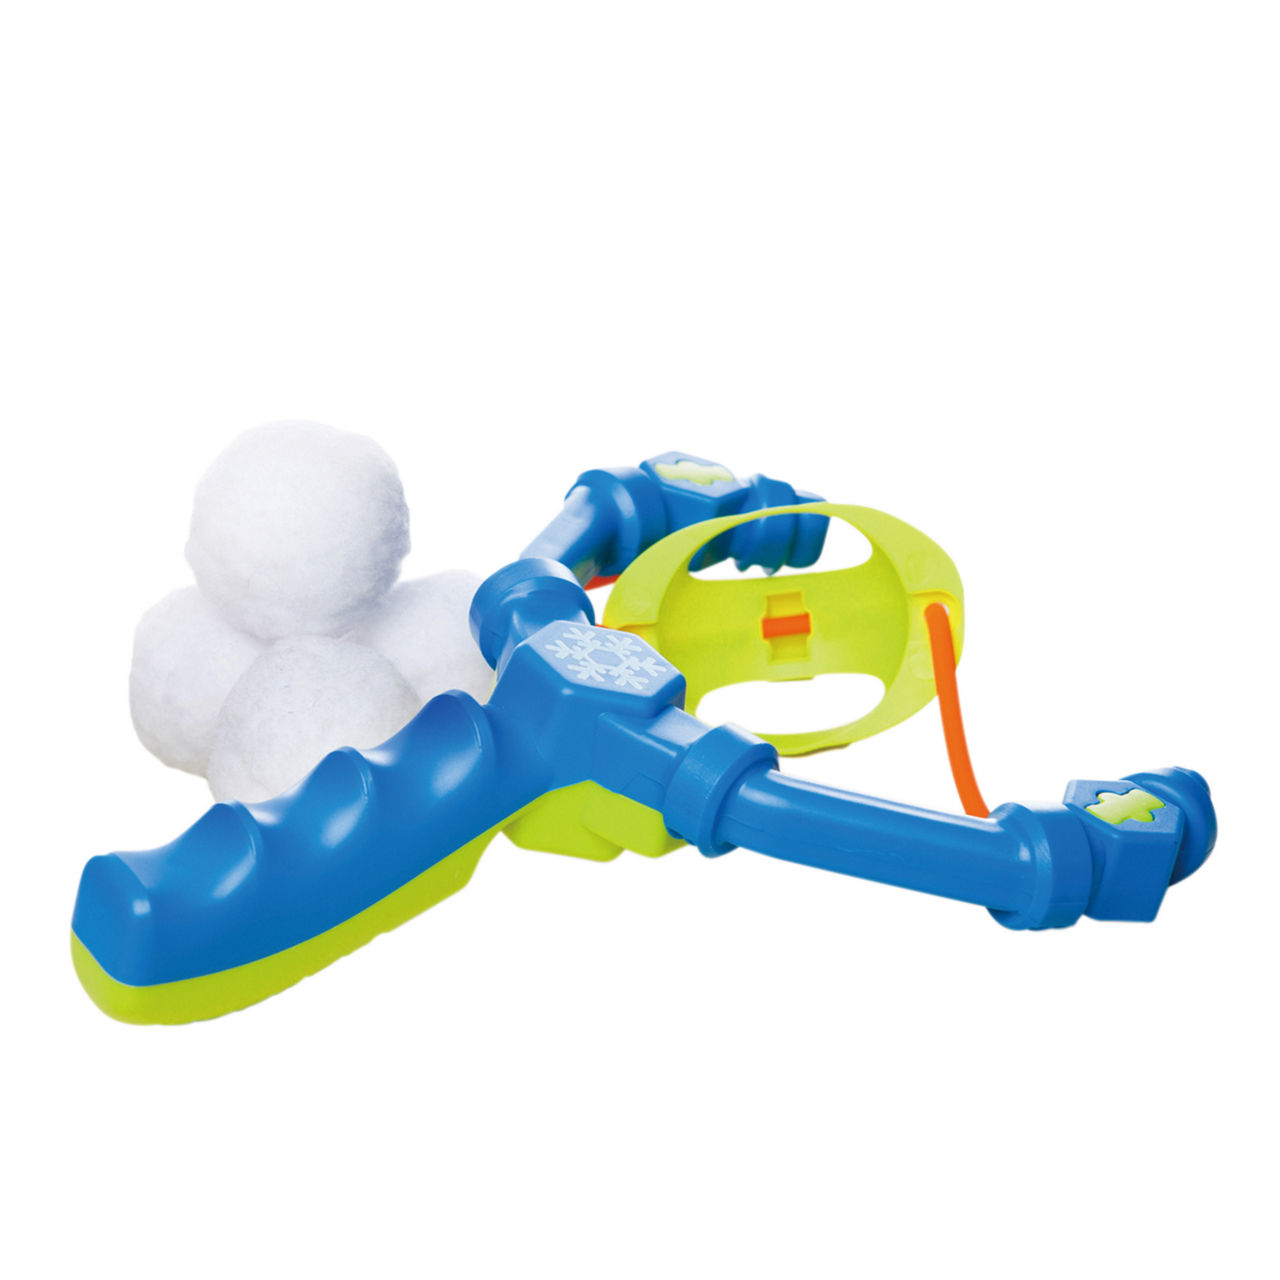 Perfect Life Ideas Indoor Snowball Fight Set - Snow Balls for Fights Indoor - Snowball Slingshot for Kids with 3 Plush Snowballs - Indoor Snowballs